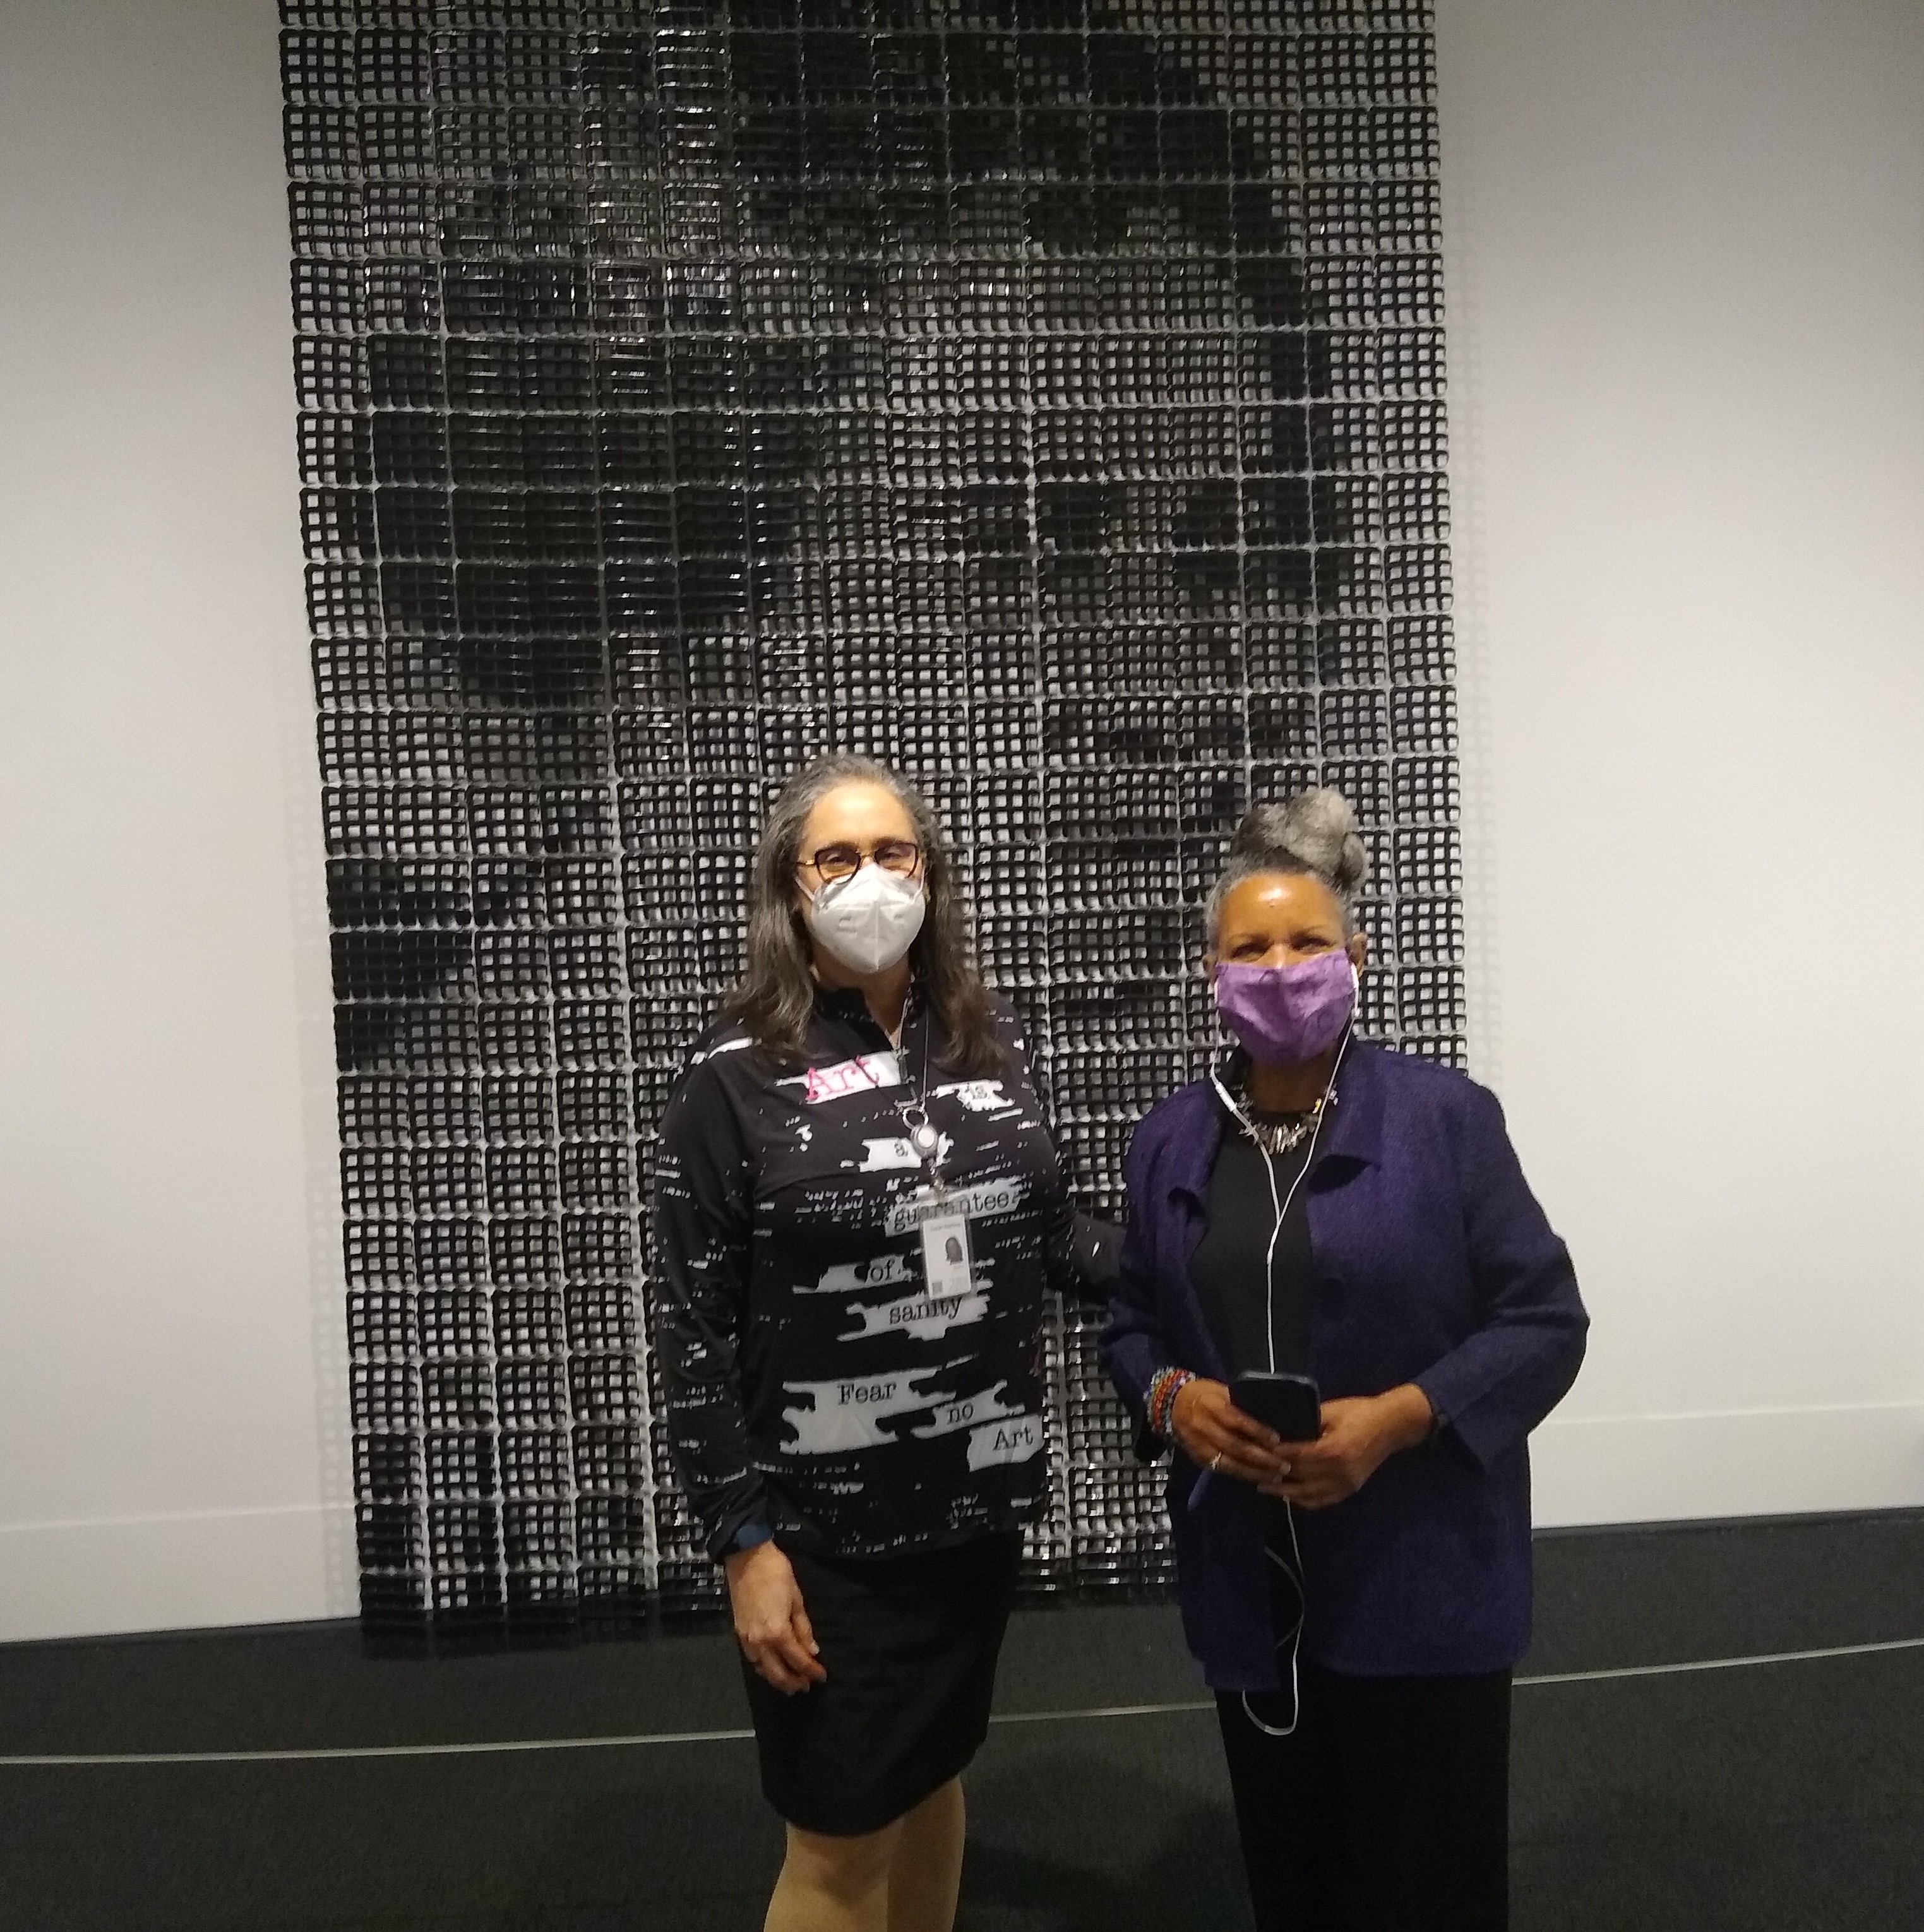 In front of a large portrait of an African American woman made from black plastic pocket combs, a light-skinned woman and dark-skinned woman stand side-by-side smiling behind face masks. The light skinned woman extends her arm behind the other woman's back.